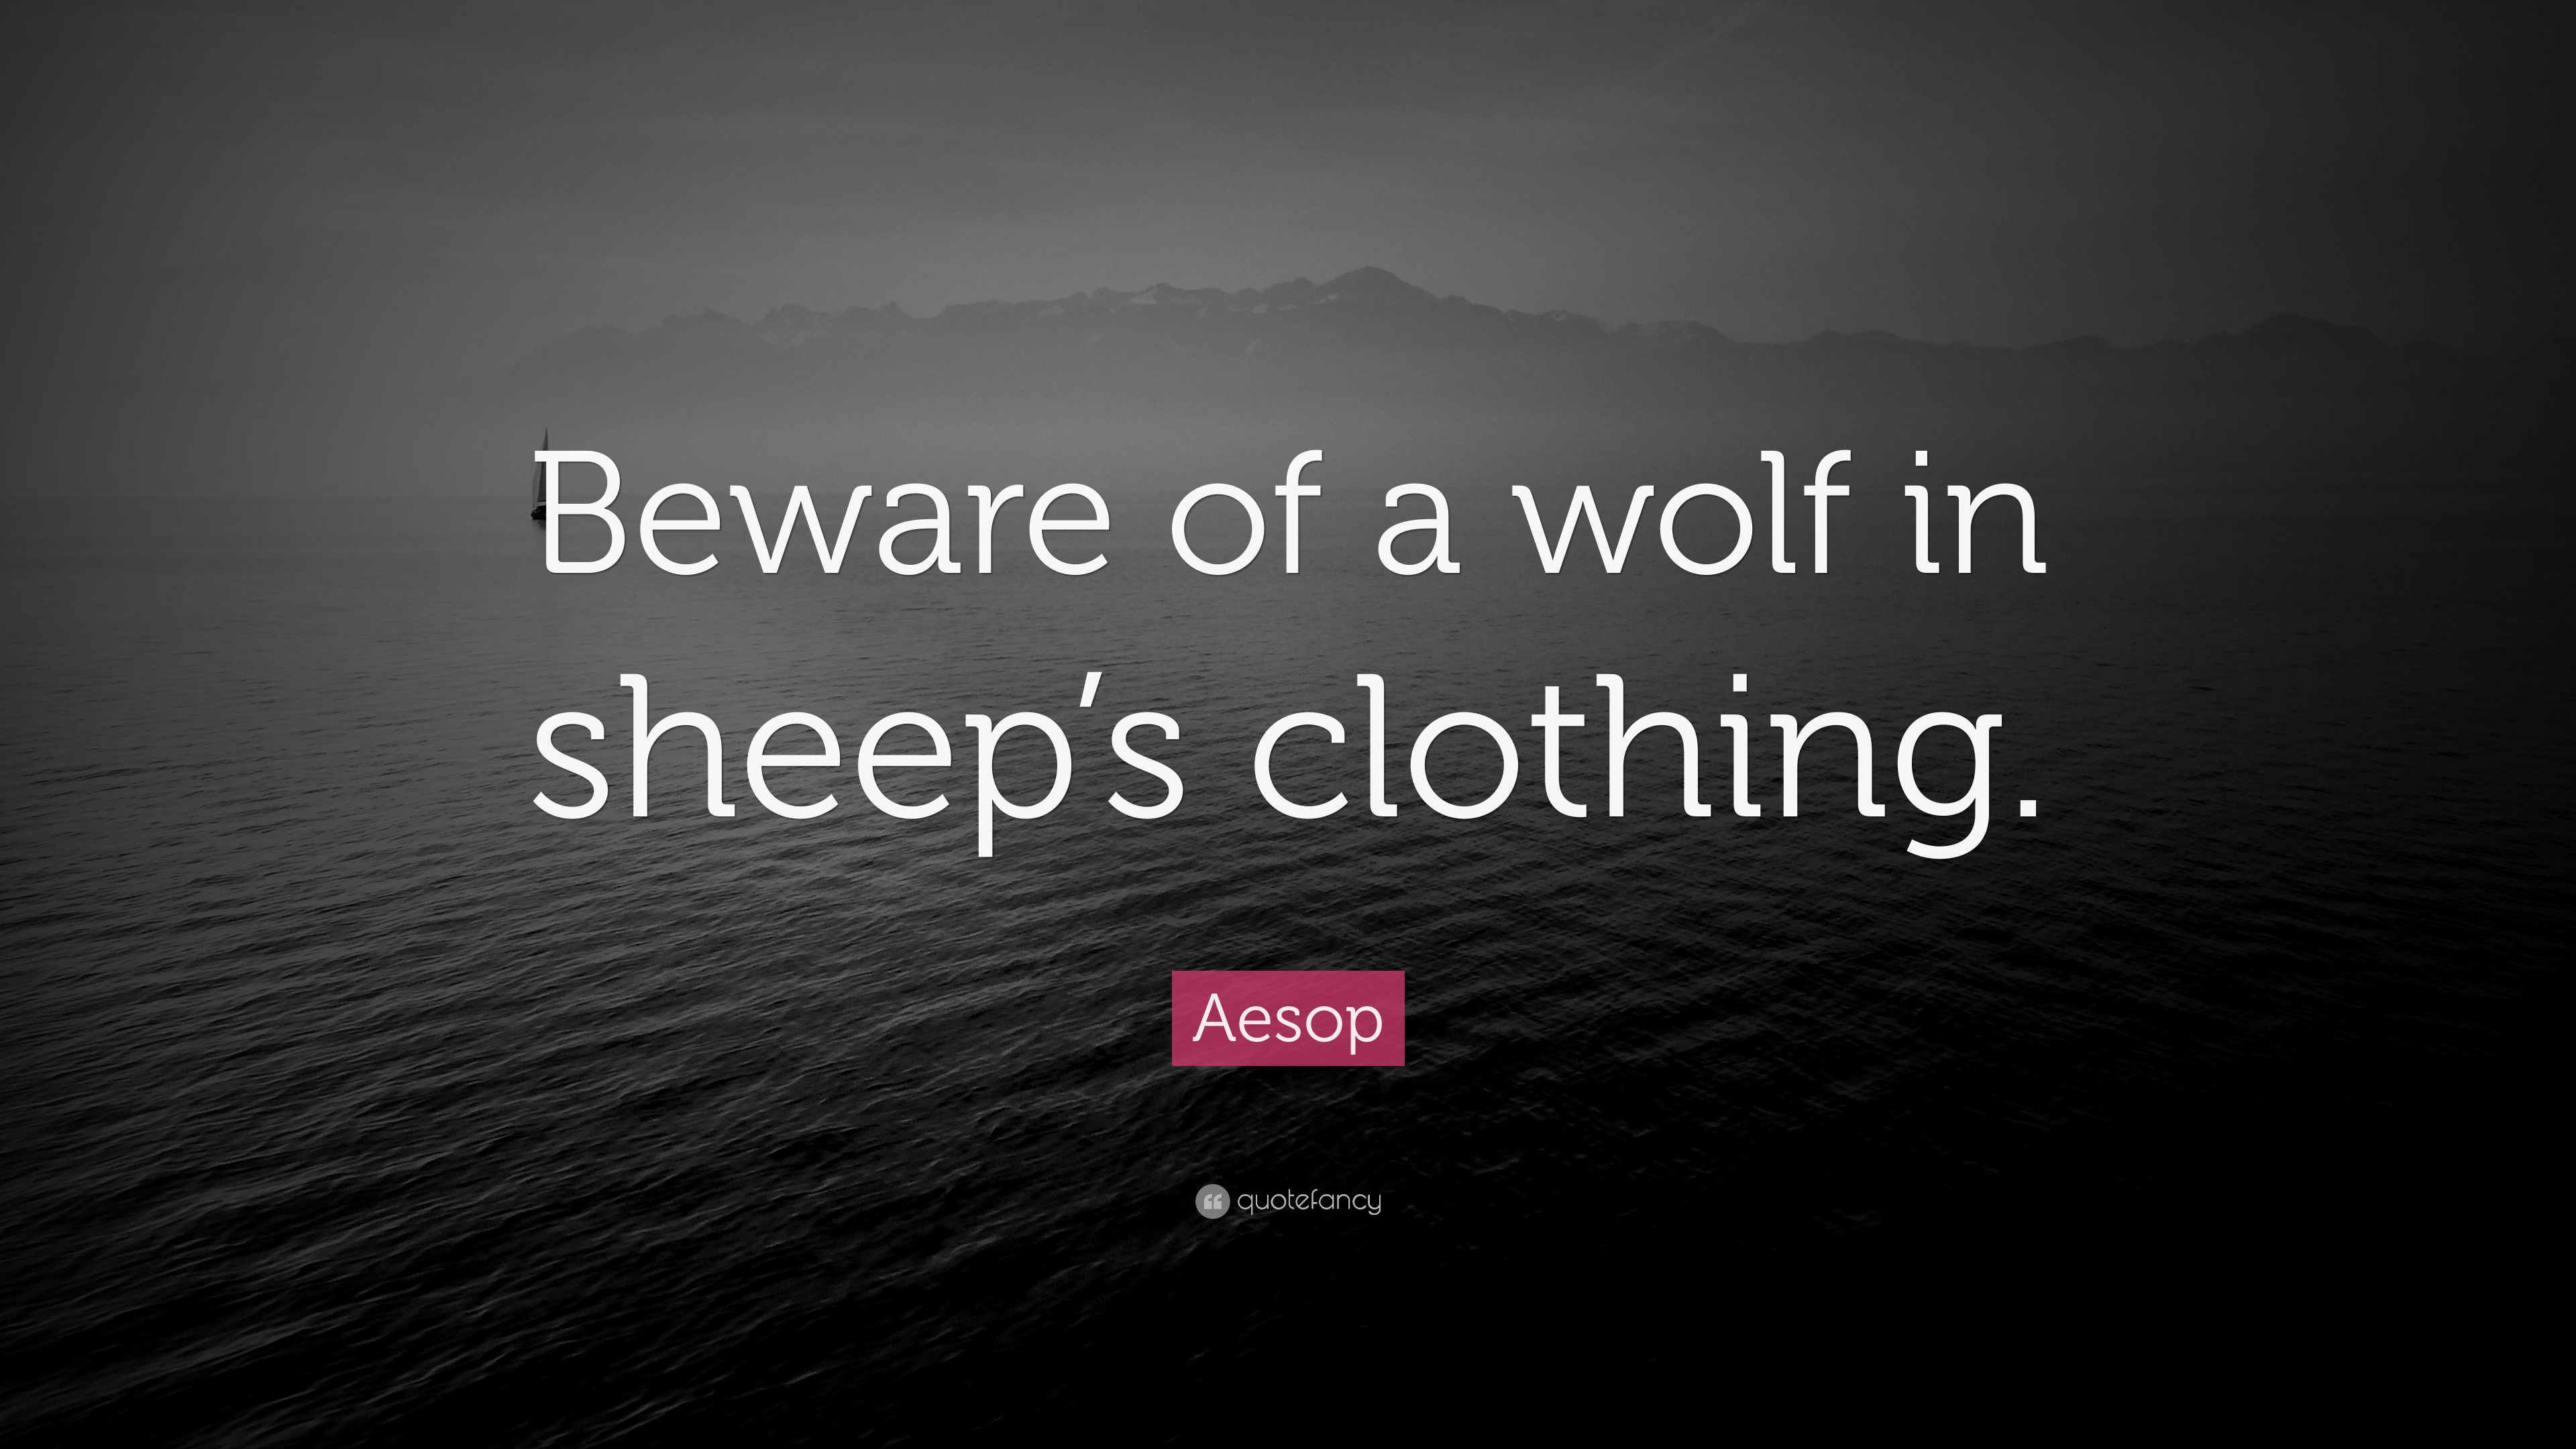 Aesop Quote: “Beware of a wolf in sheep's clothing.” 10